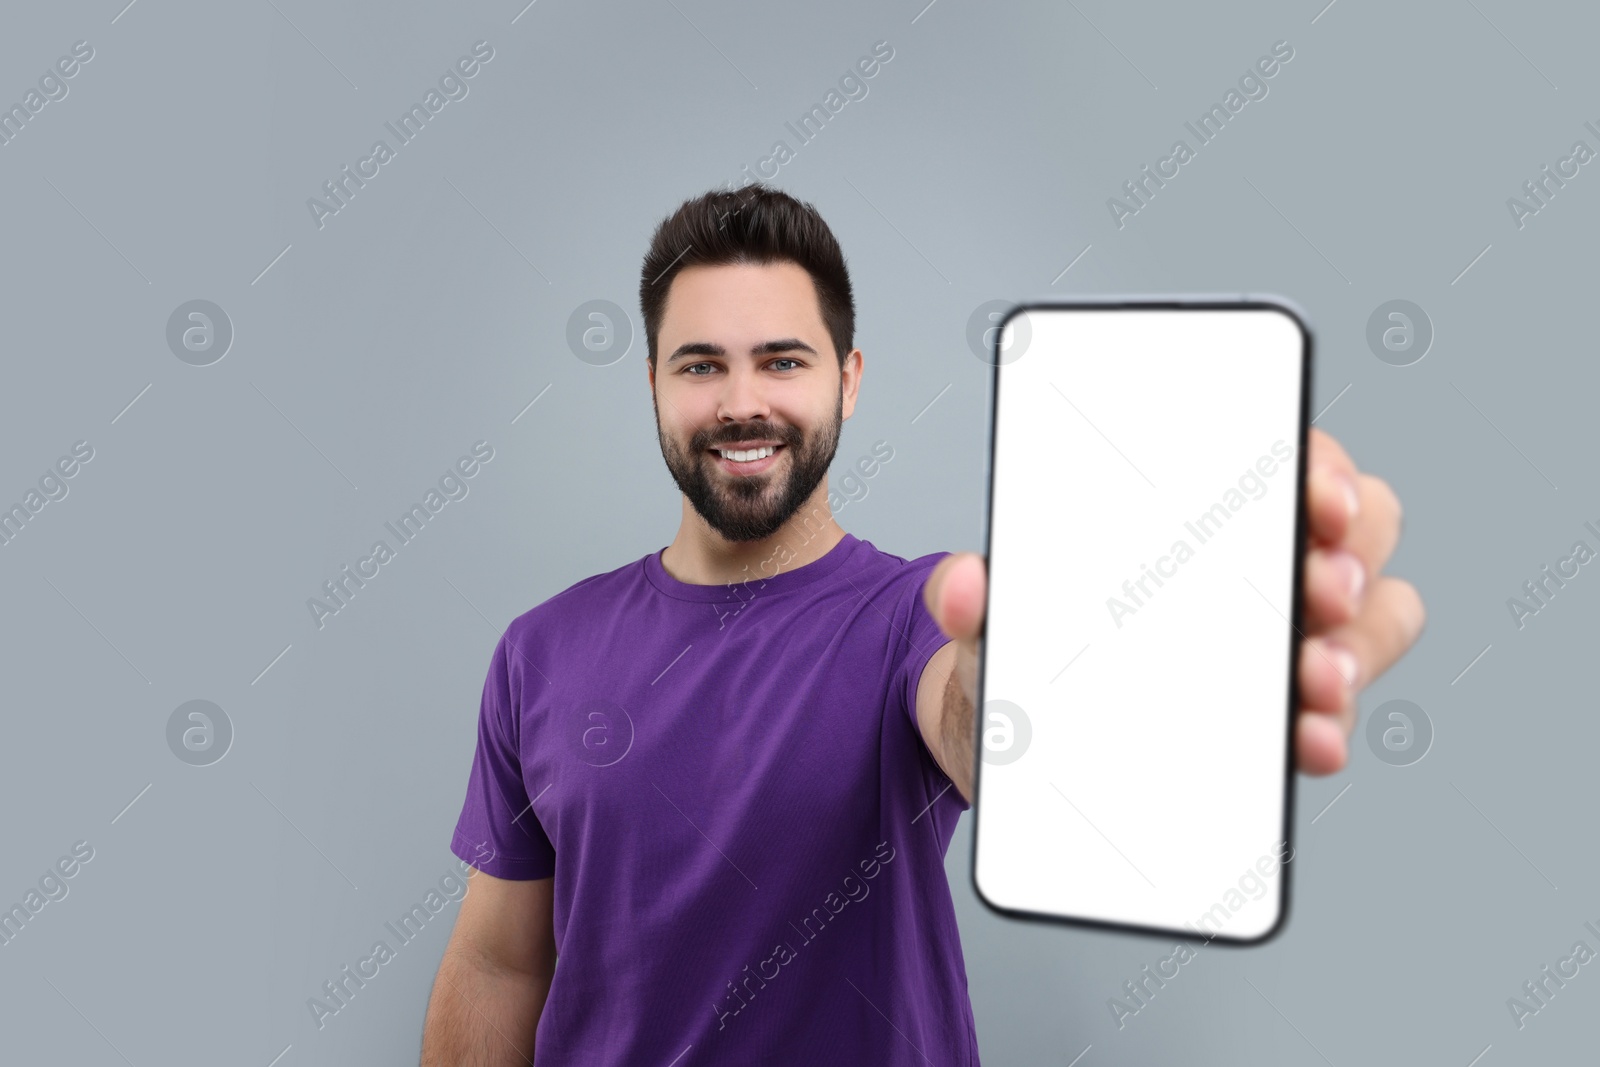 Photo of Young man showing smartphone in hand on light grey background